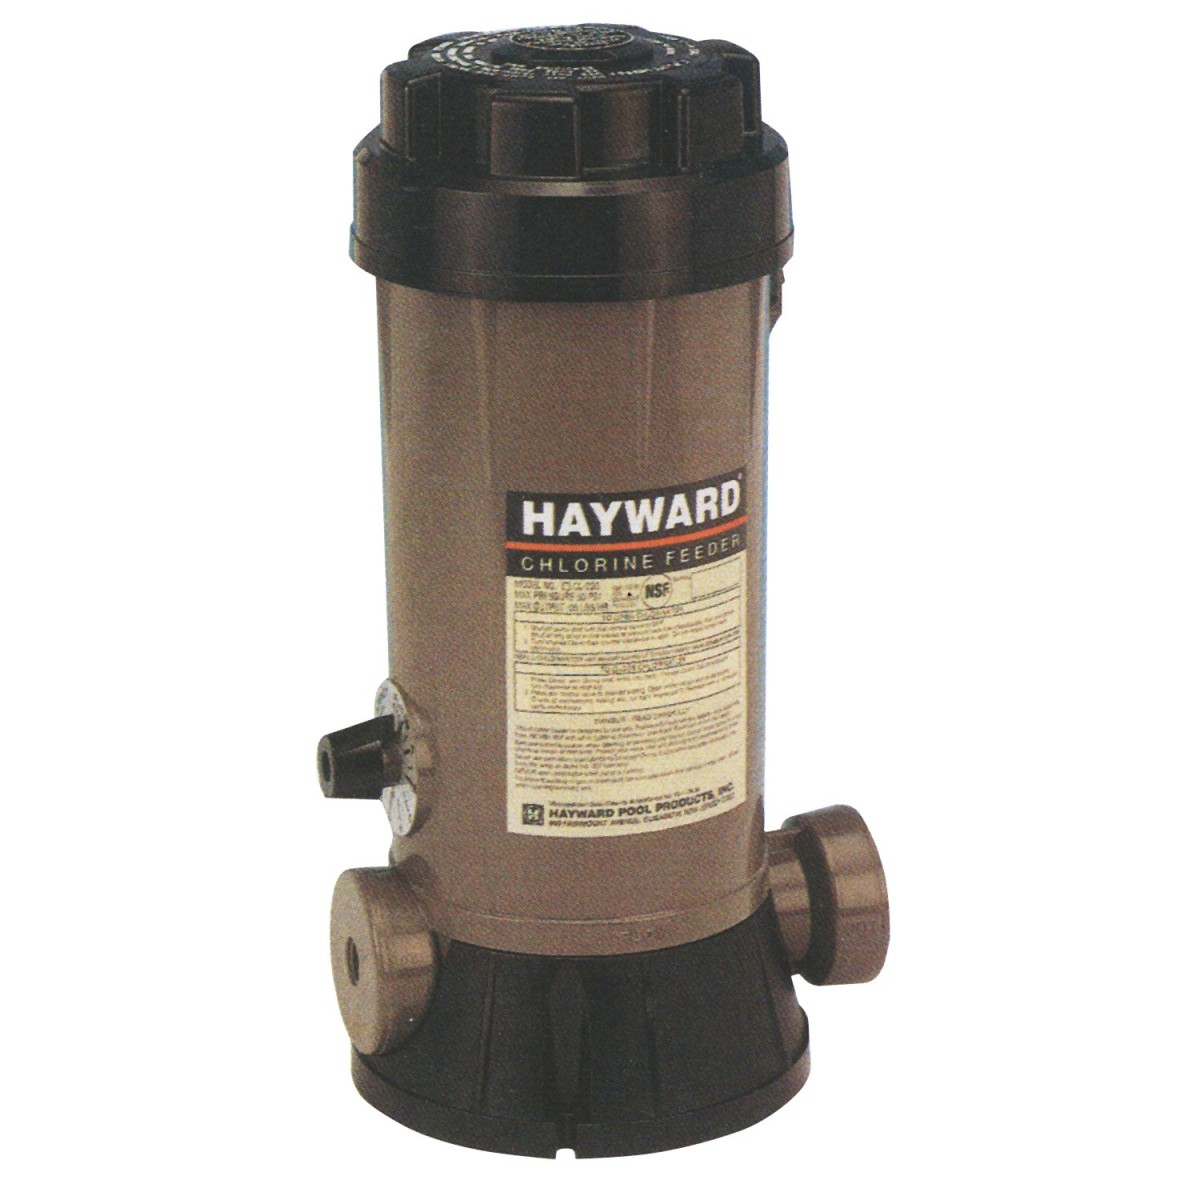 Distributor of chemical products Hayward capacity 14 kg